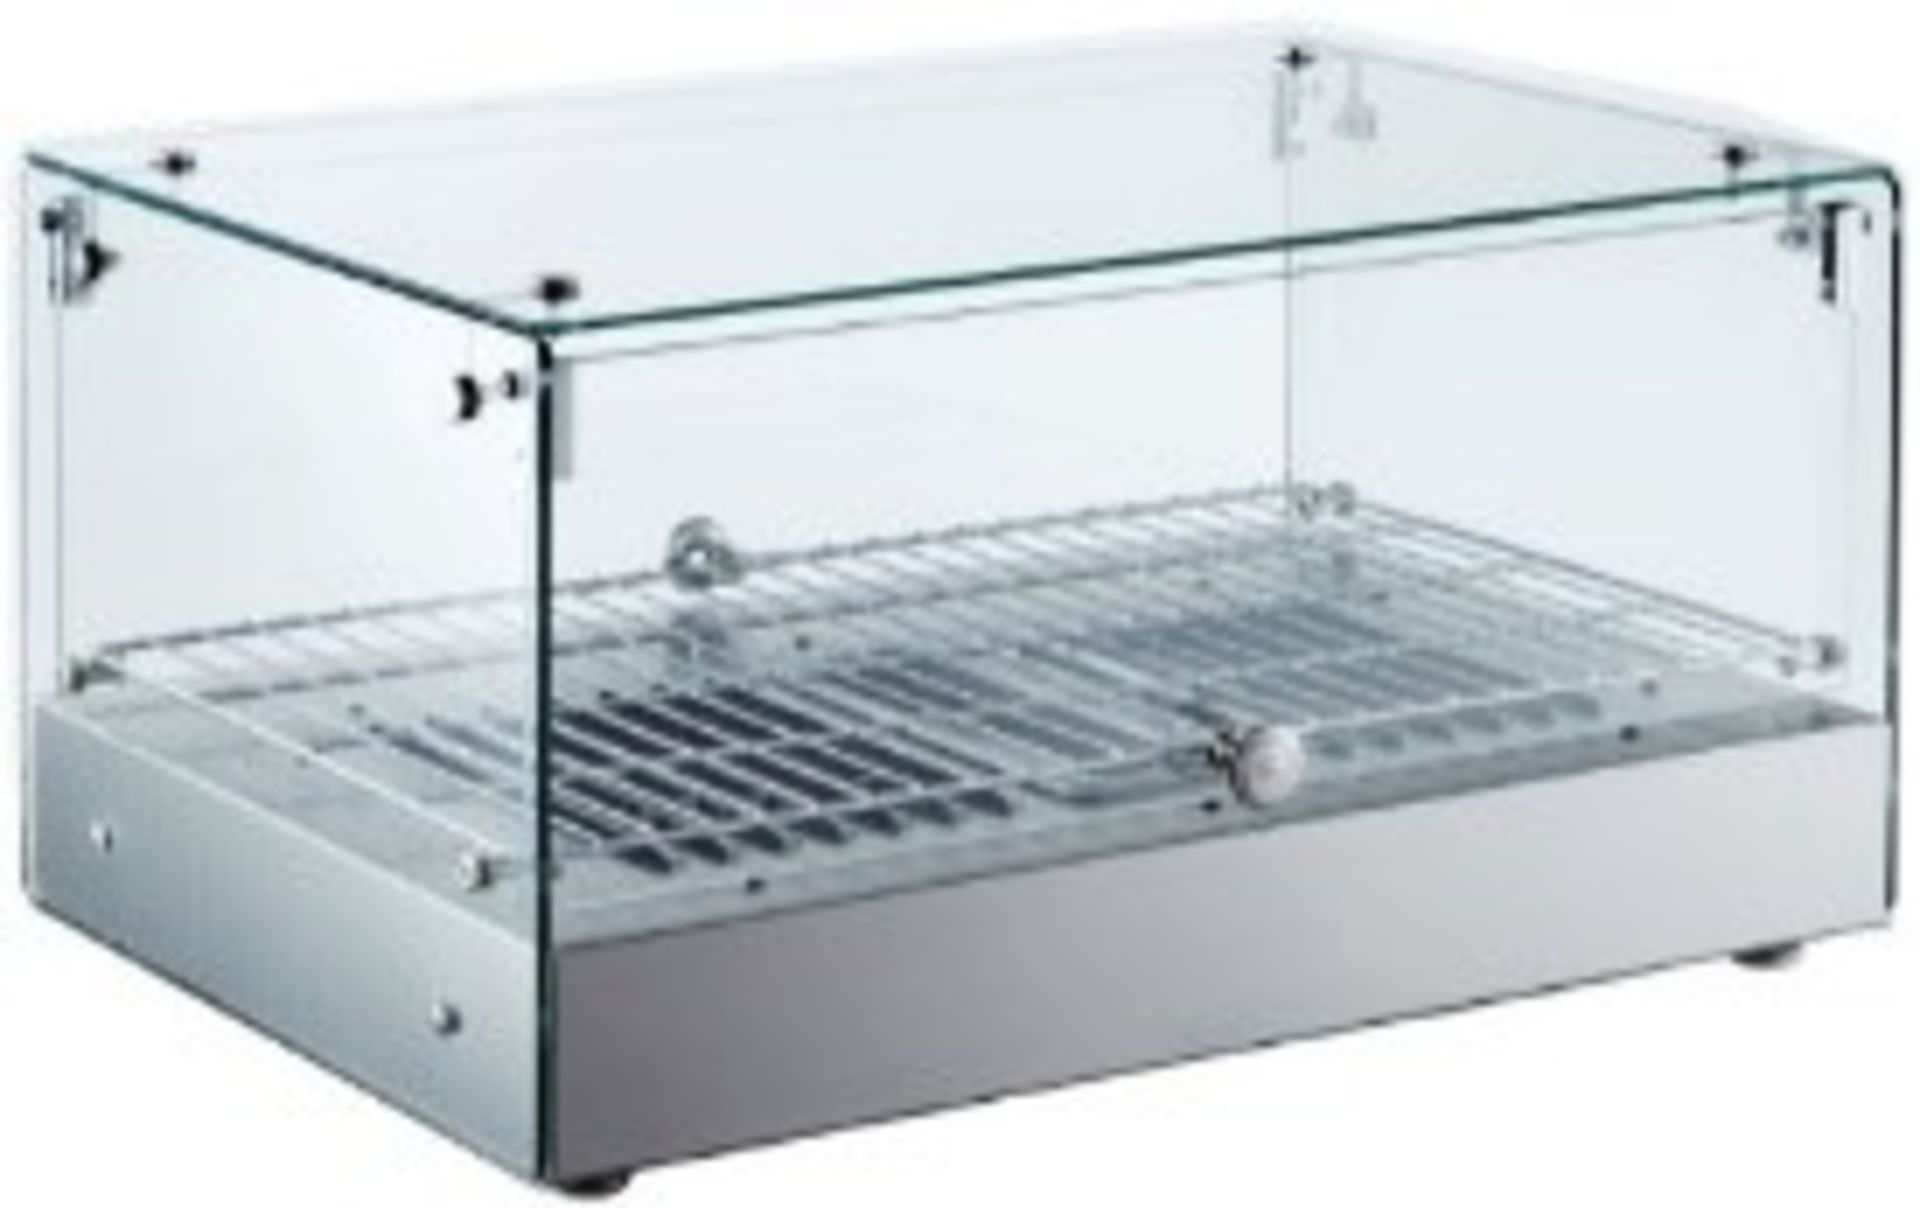 EQ Commercial Heating  Countertop squared Display Flat Net glass Stainless steel Model #:RTR-35L L*